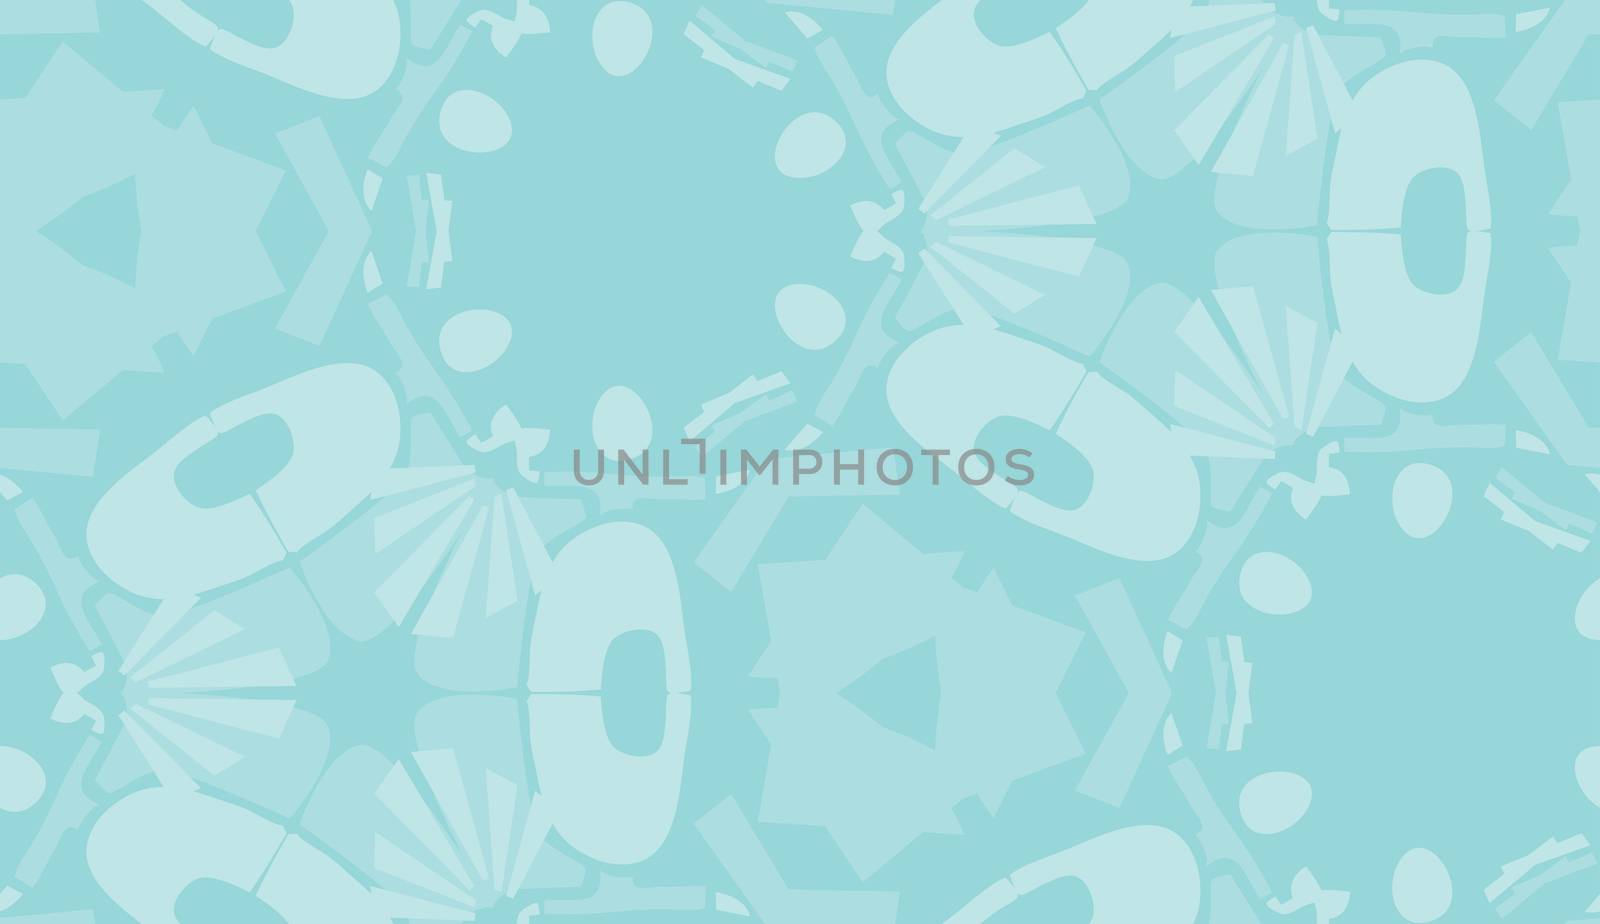 Repeating abstract blue shapes in repeating wallpaper background pattern